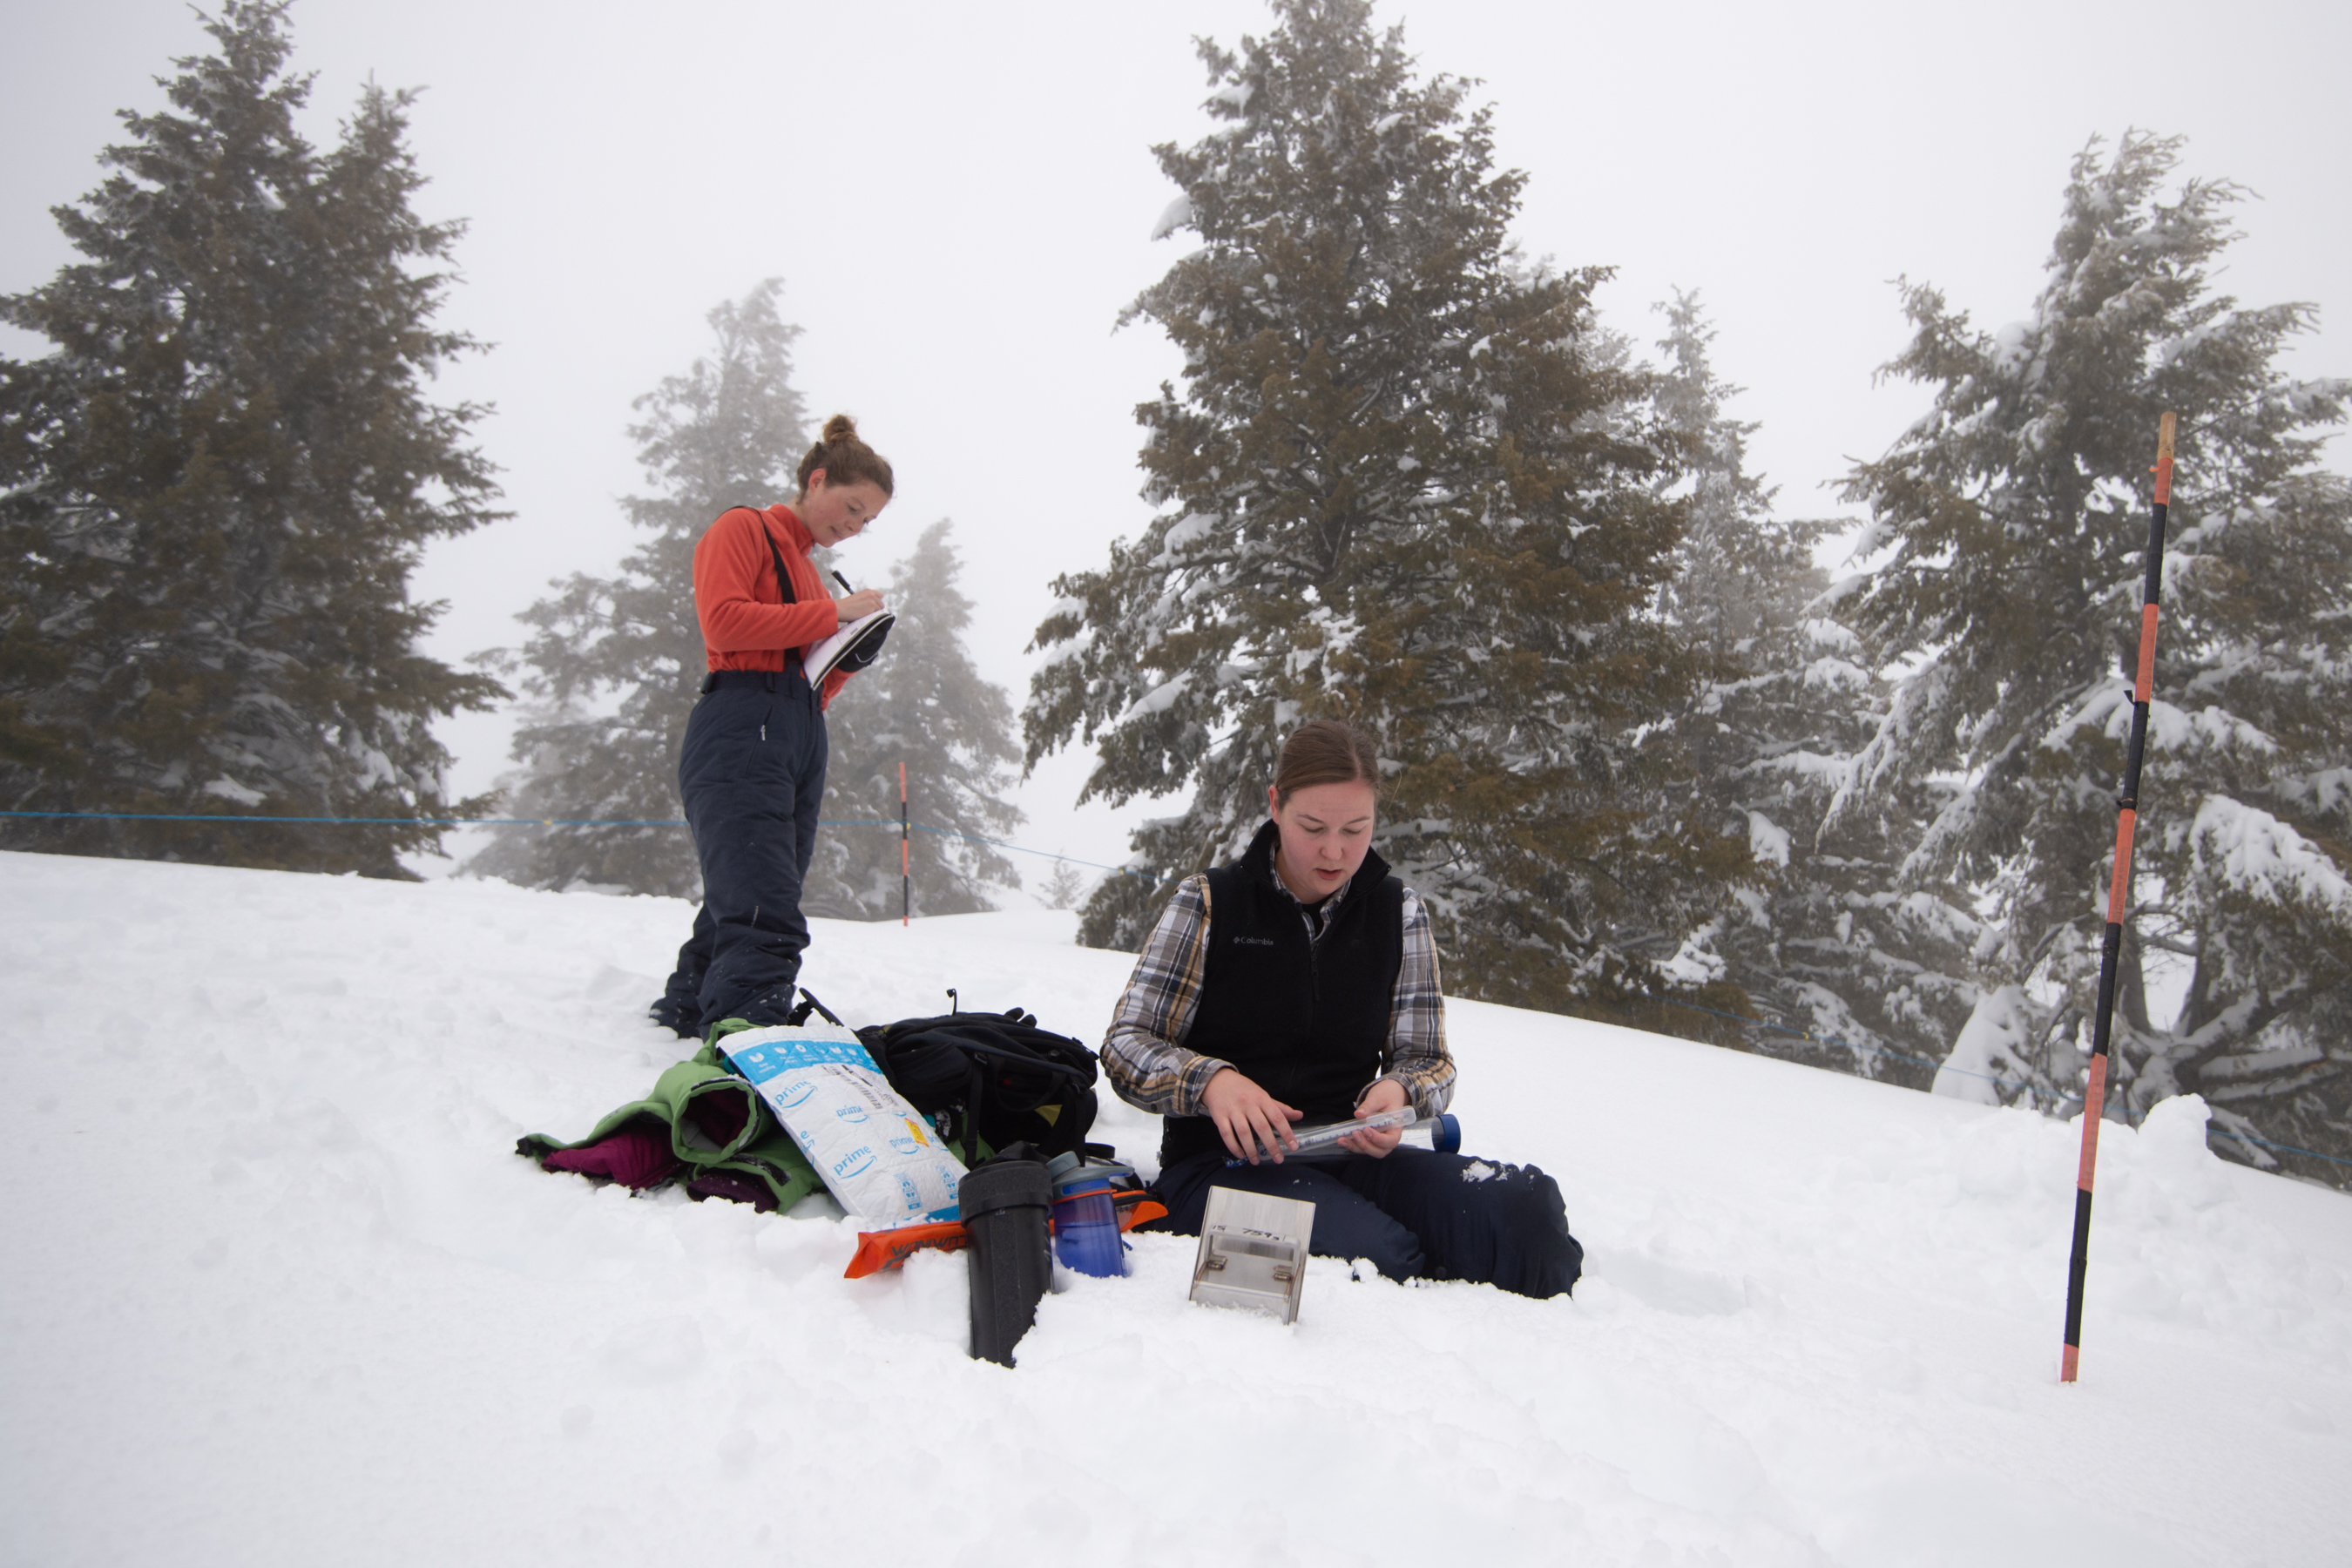 Boise State grad students Isis Brangers and Allison Vincent take snowpack measurements at a test site at Bogus Basin as part of the NASA SnowEx program, photo Patrick Sweeney